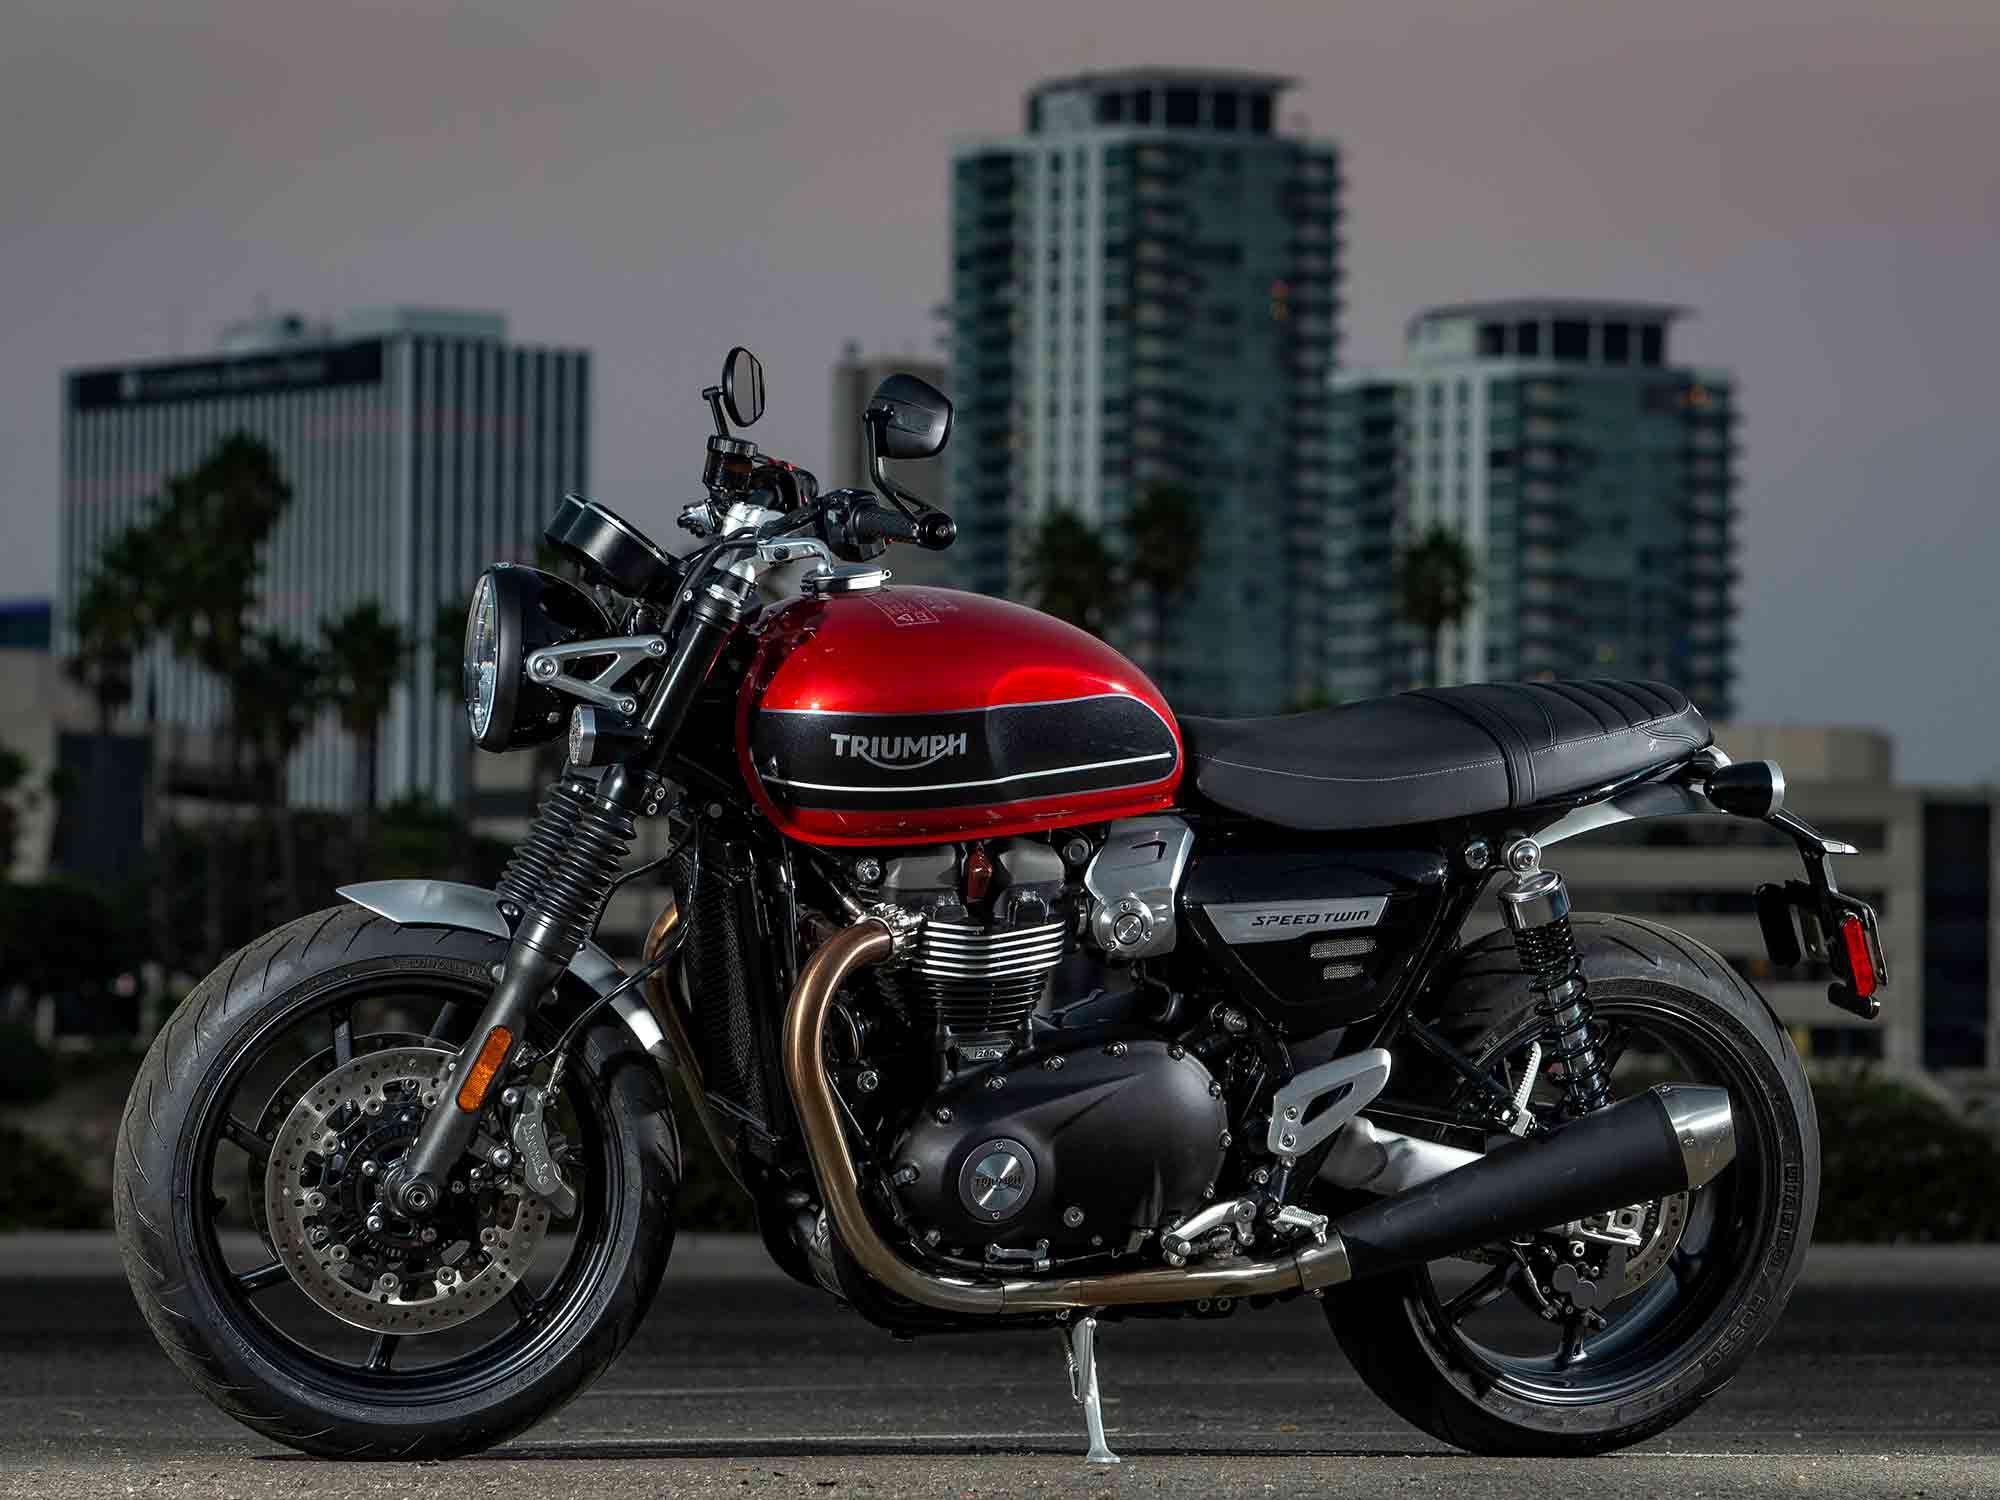 Combining the look of a classic British twin with a sporty, Thruxton-derived chassis and torquey 1,200cc parallel twin brought new magic to Triumph’s Classic line.